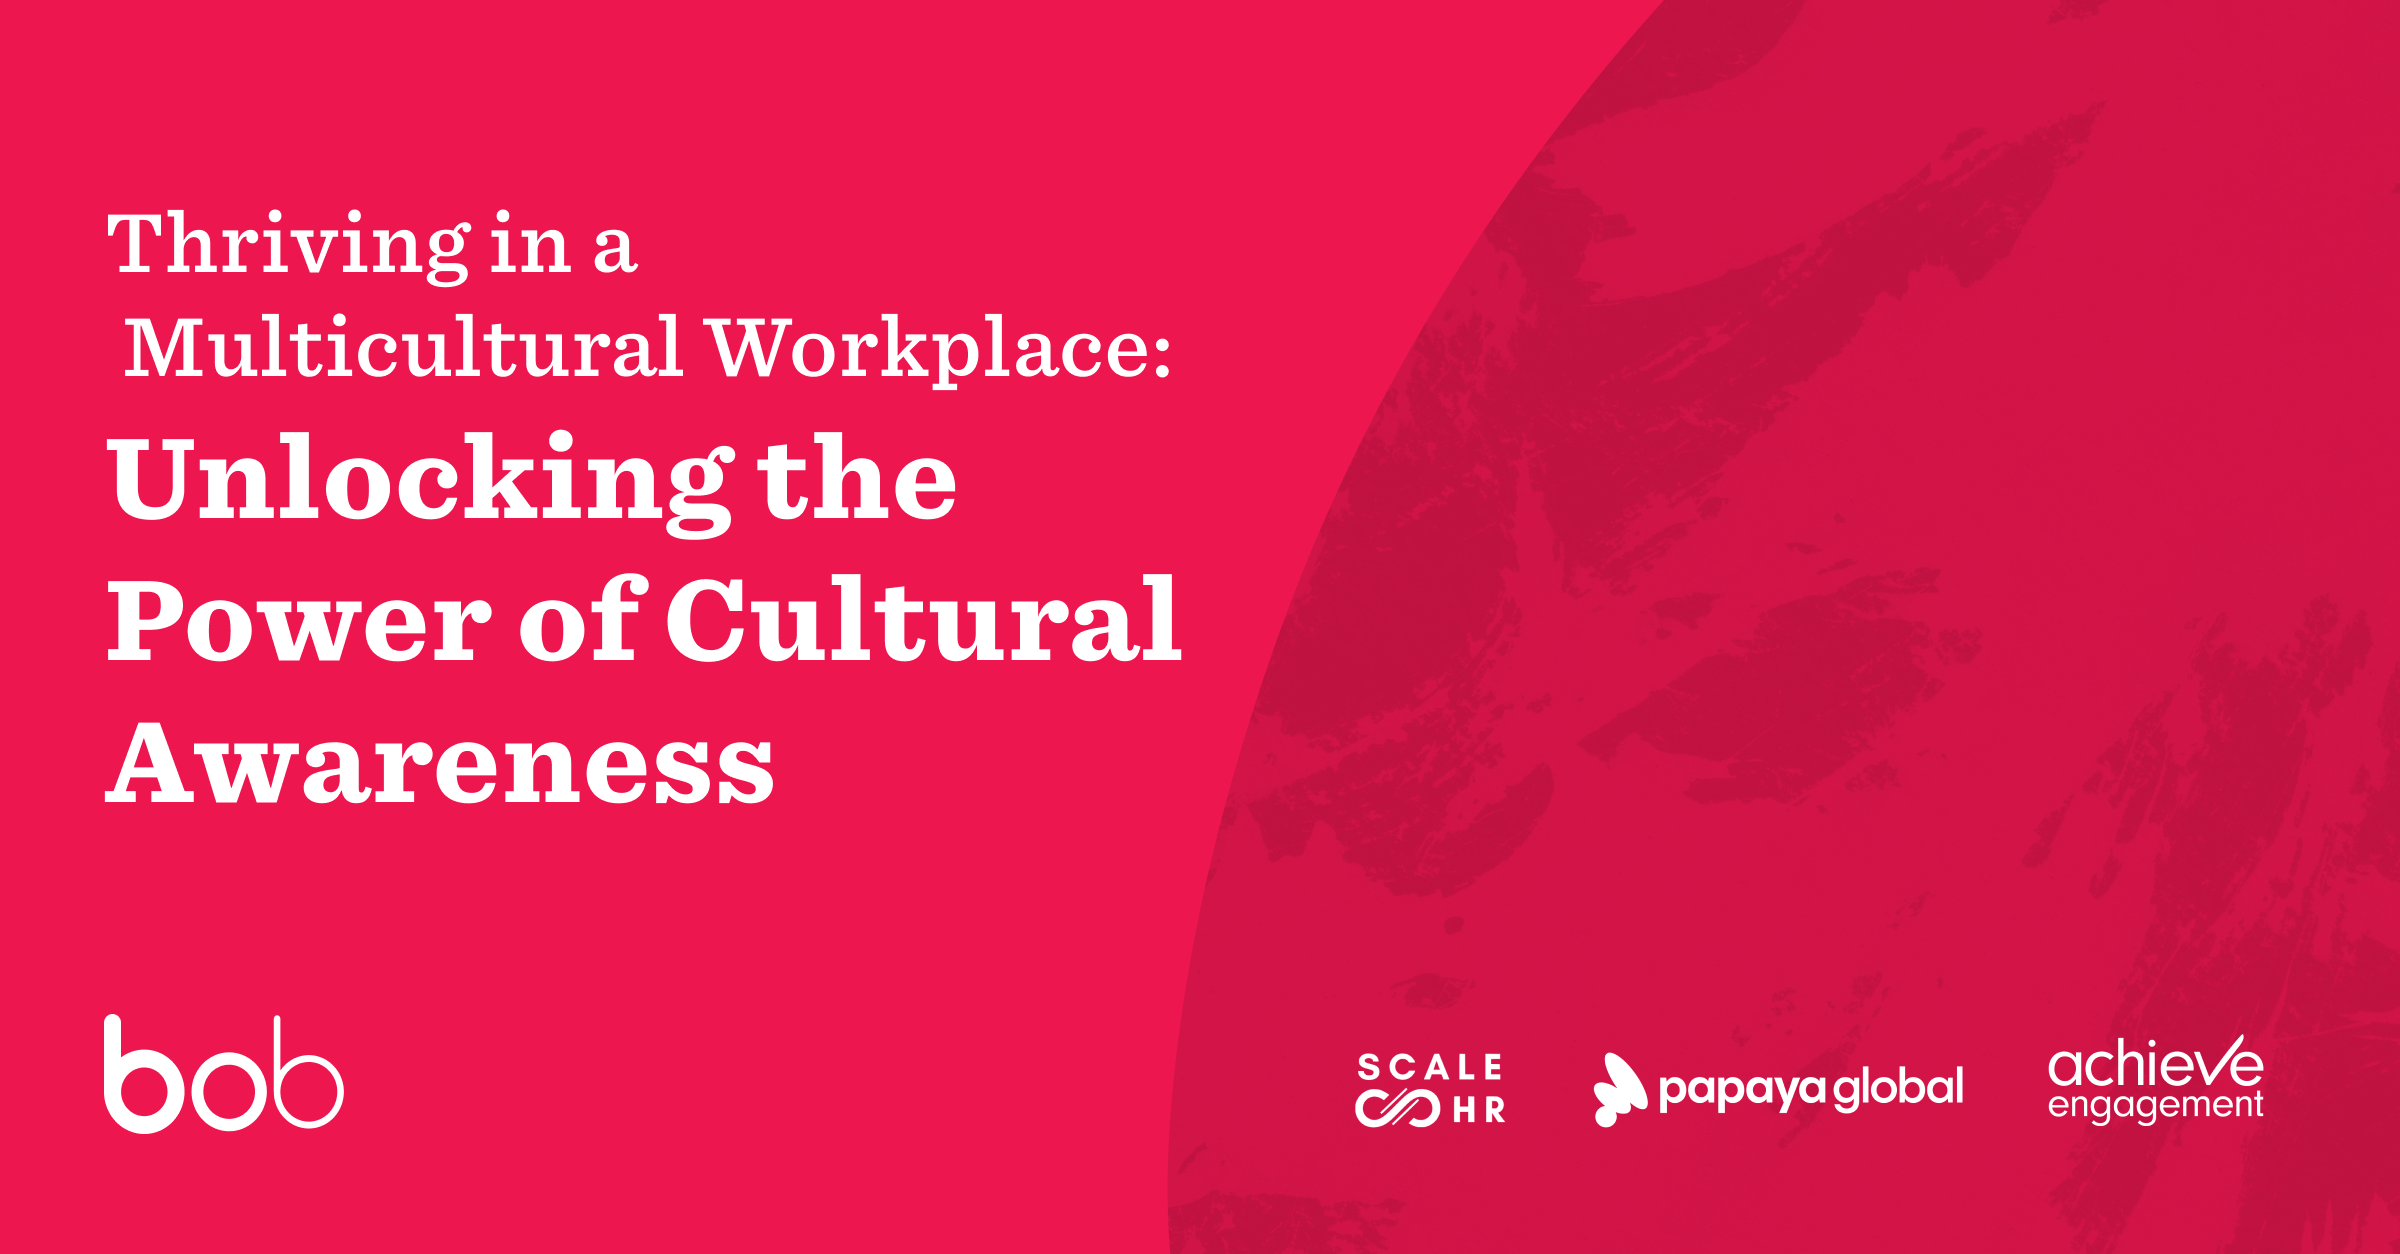 Thriving in a Multicultural Workplace: Unlocking the Power of Cultural Awareness - Michael-Landers_EMEA_webinar_Loby-image-2.png